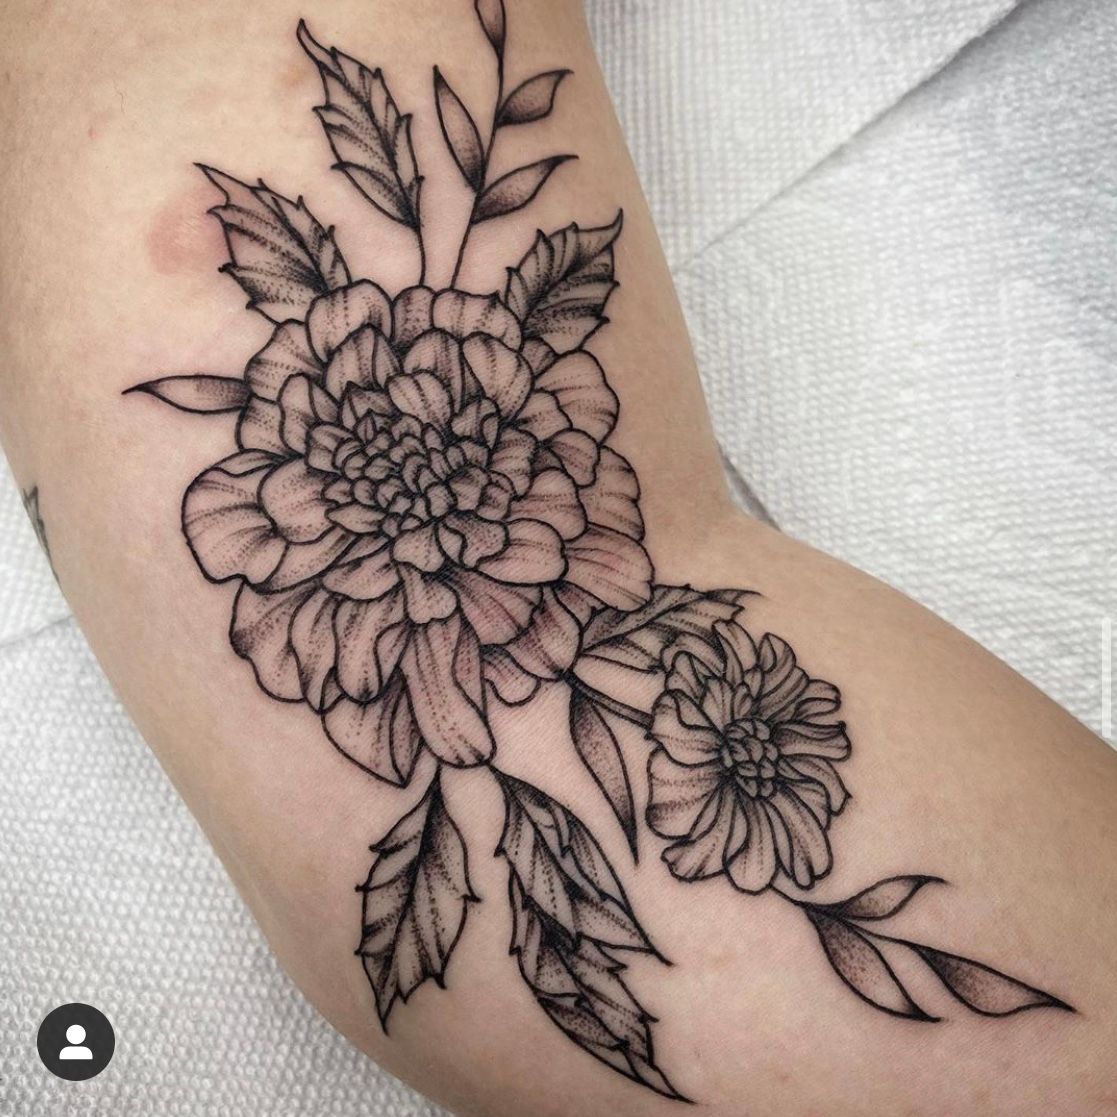 Tattoo uploaded by Lau Tattoos  Some florals for the inner elbow  Tattoodo